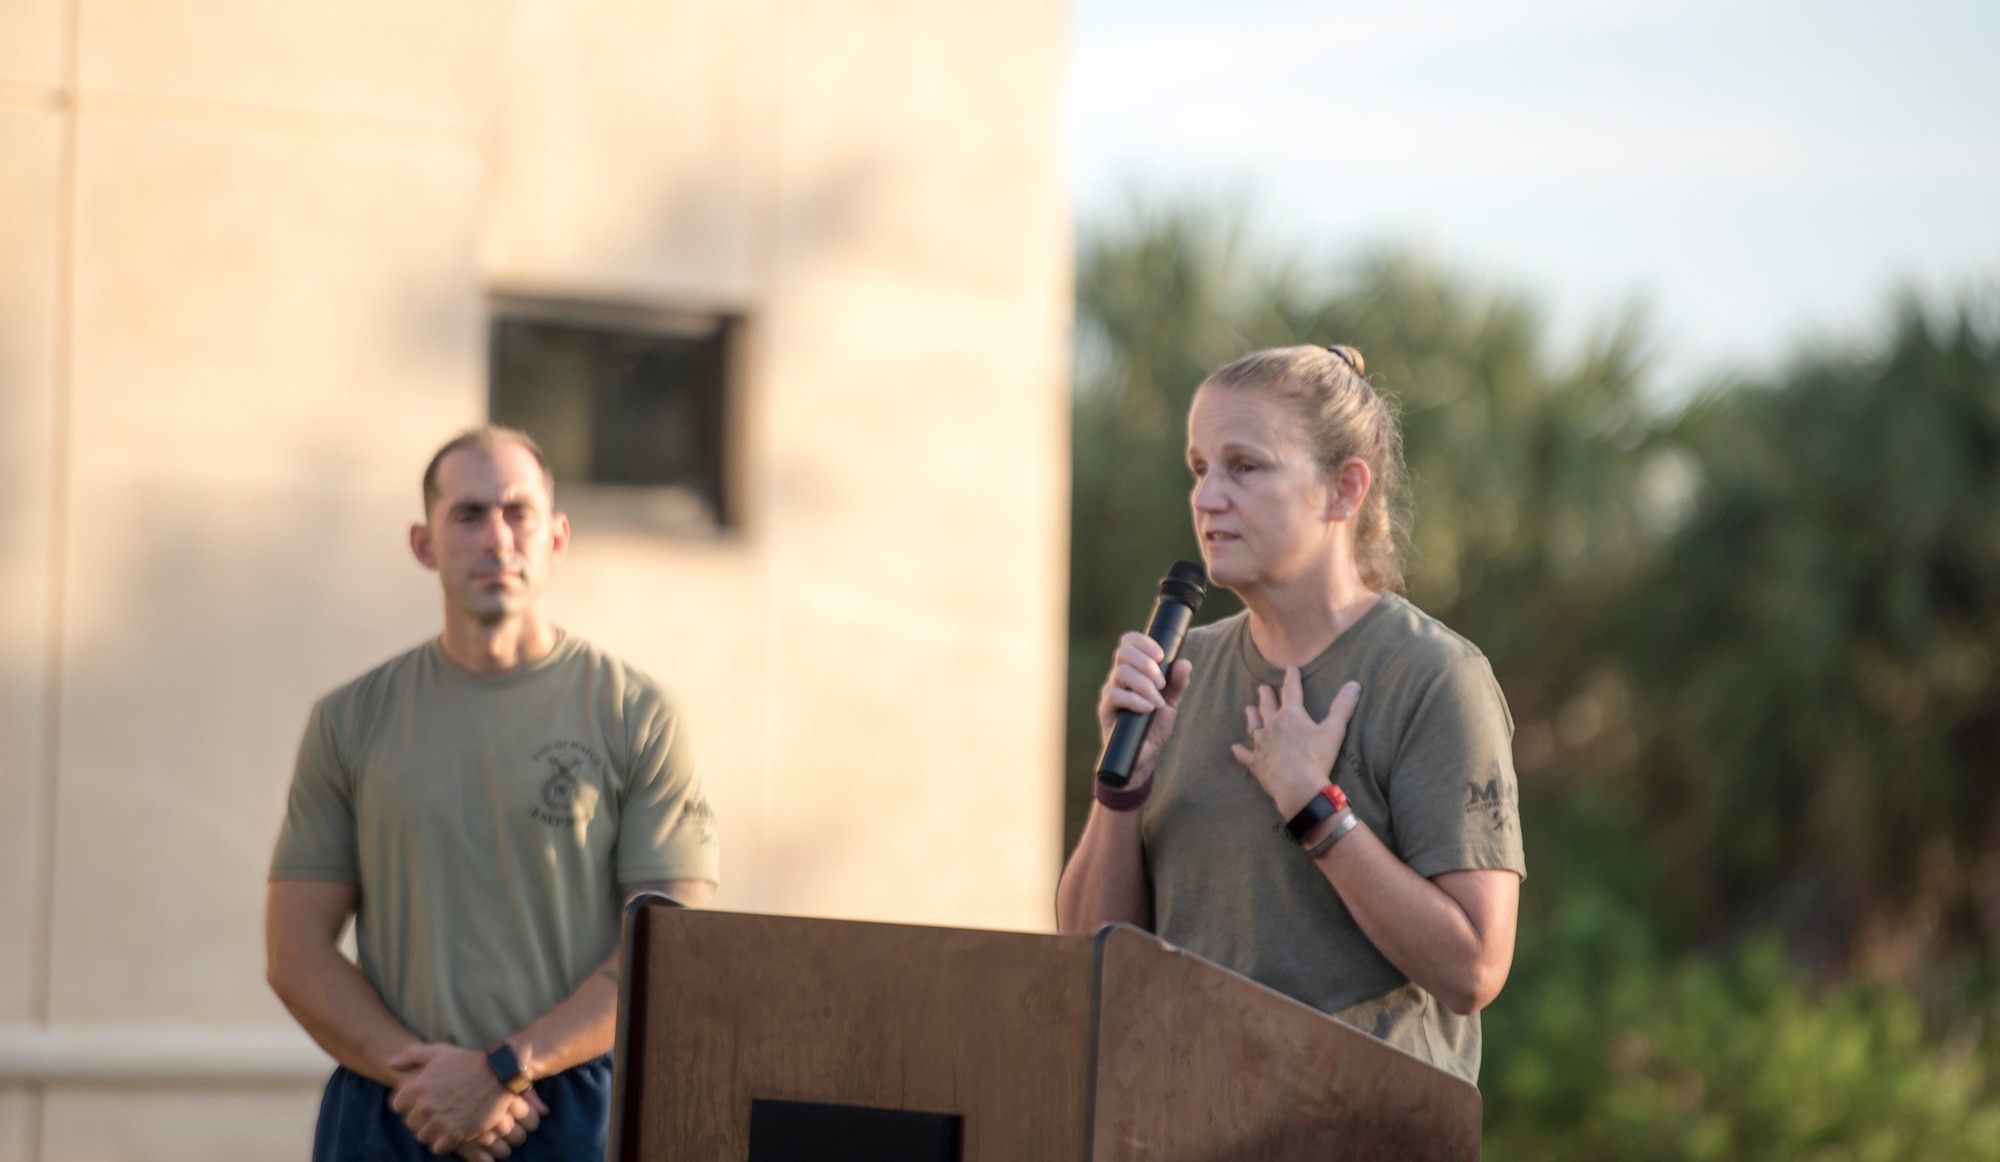 Jiffy Helton, the mother of 1st Lt. Joseph Helton, addresses the 6th Security Forces Squadron before the 11th annual Helton Haul 5K run, at MacDill Air Force Base, Fla., Sept. 18, 2020.